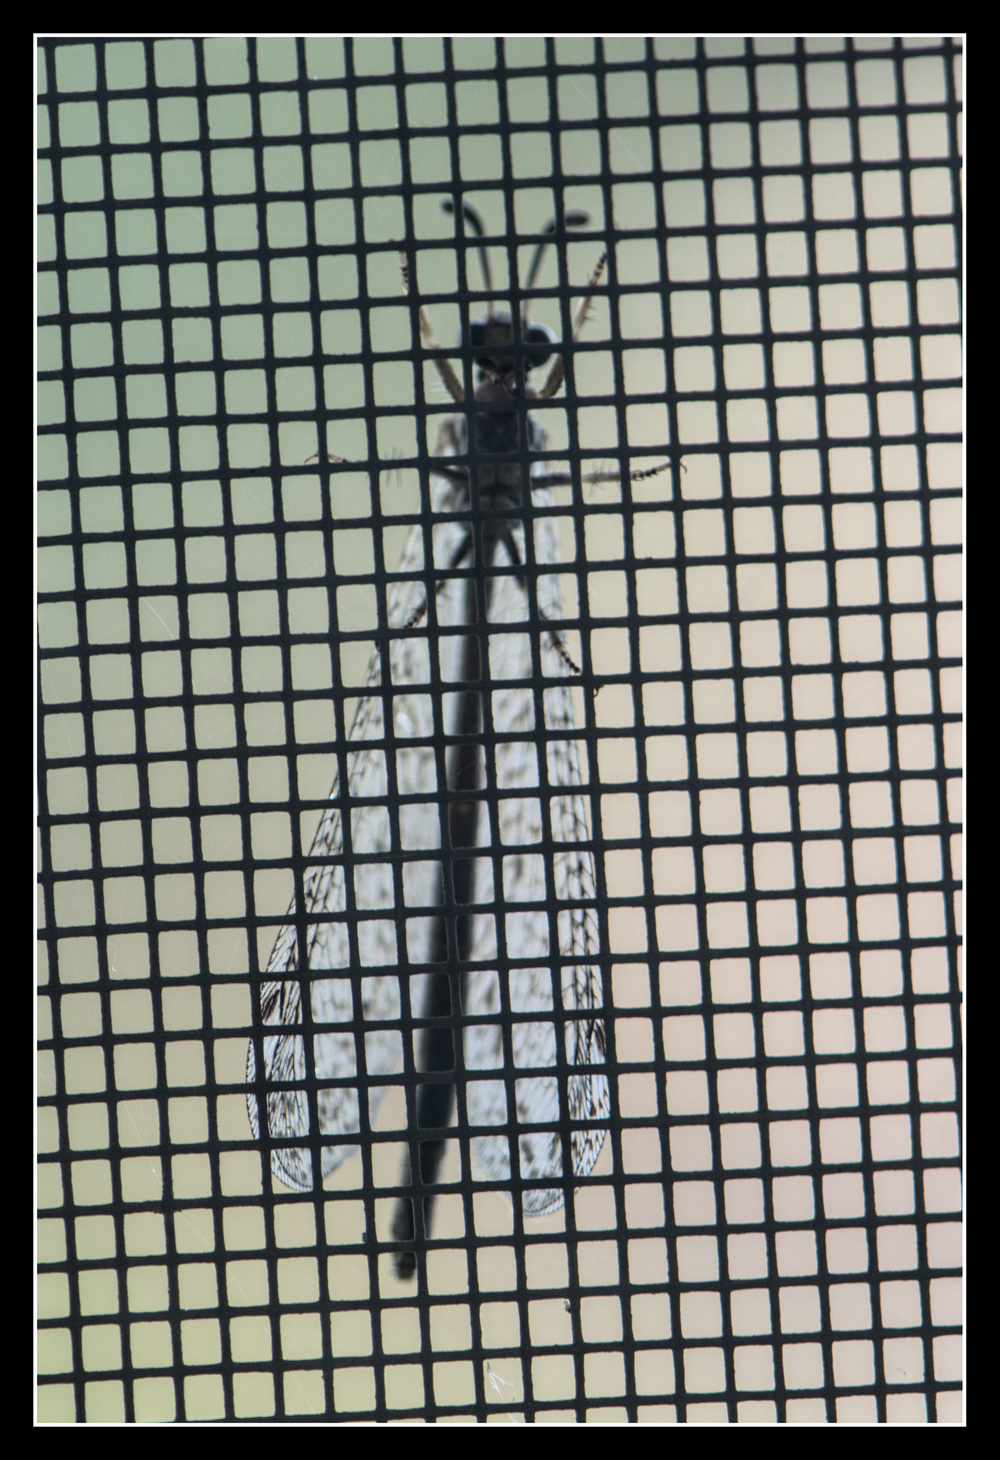 The underside of a lacewing is seen close up, through a window screen.